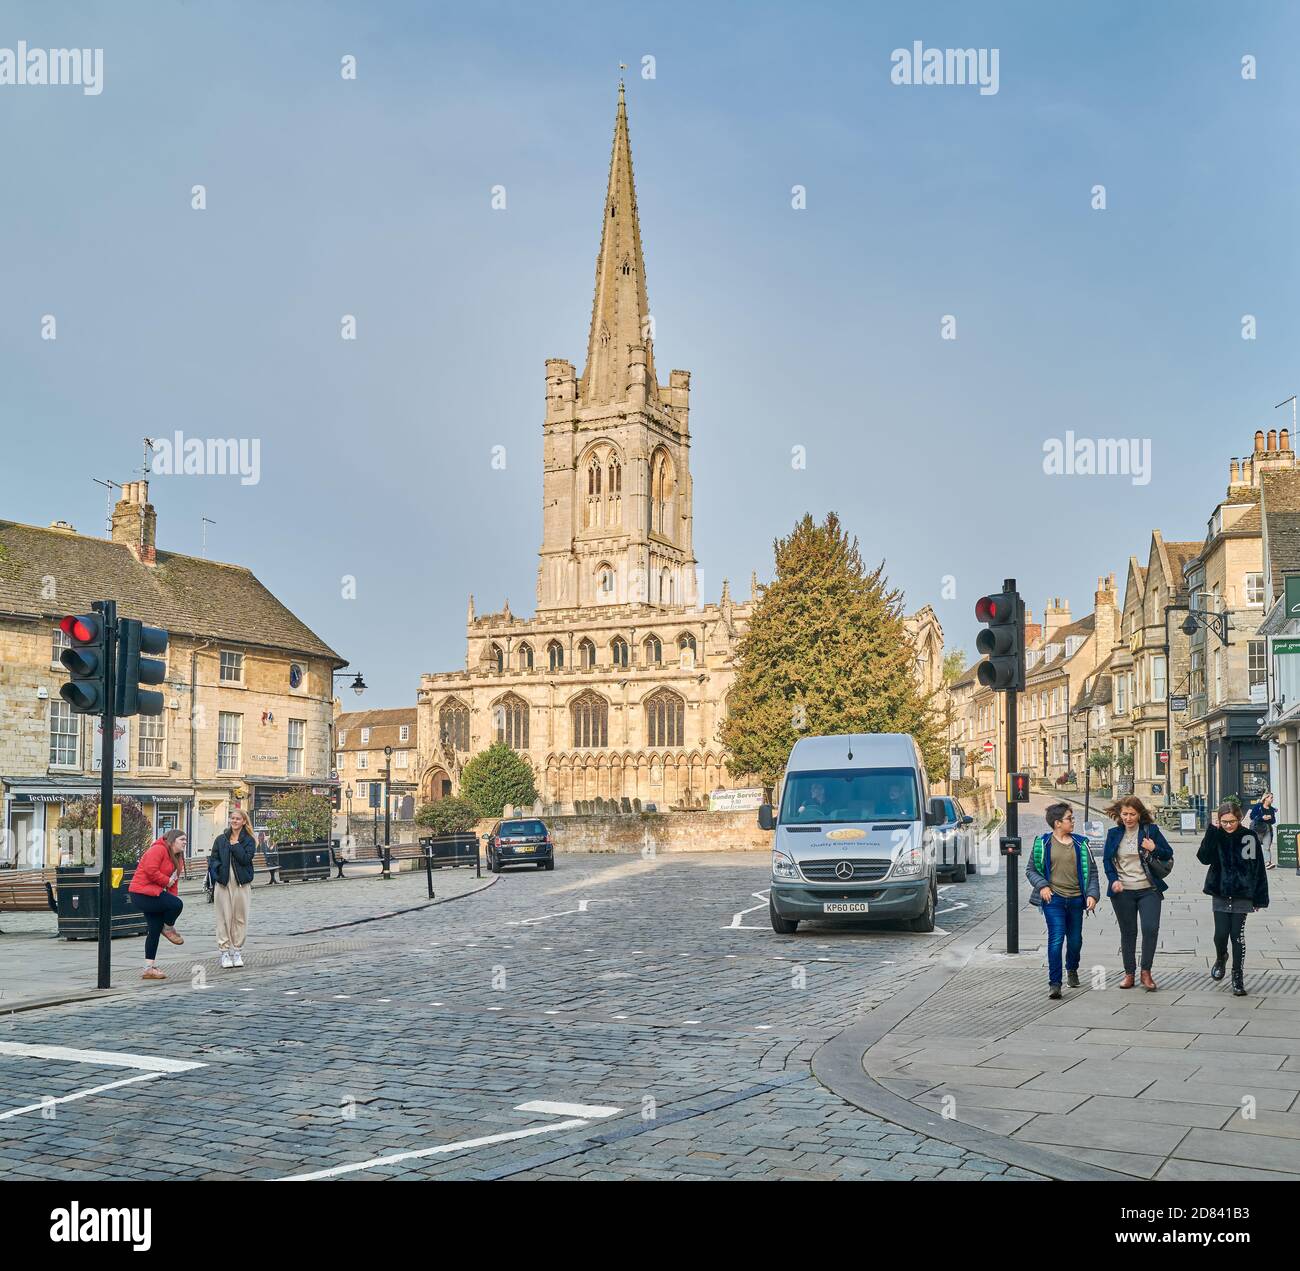 Red Lion Square with All Saints church at the town of Stamford, Lincolnshire, England. Stock Photo